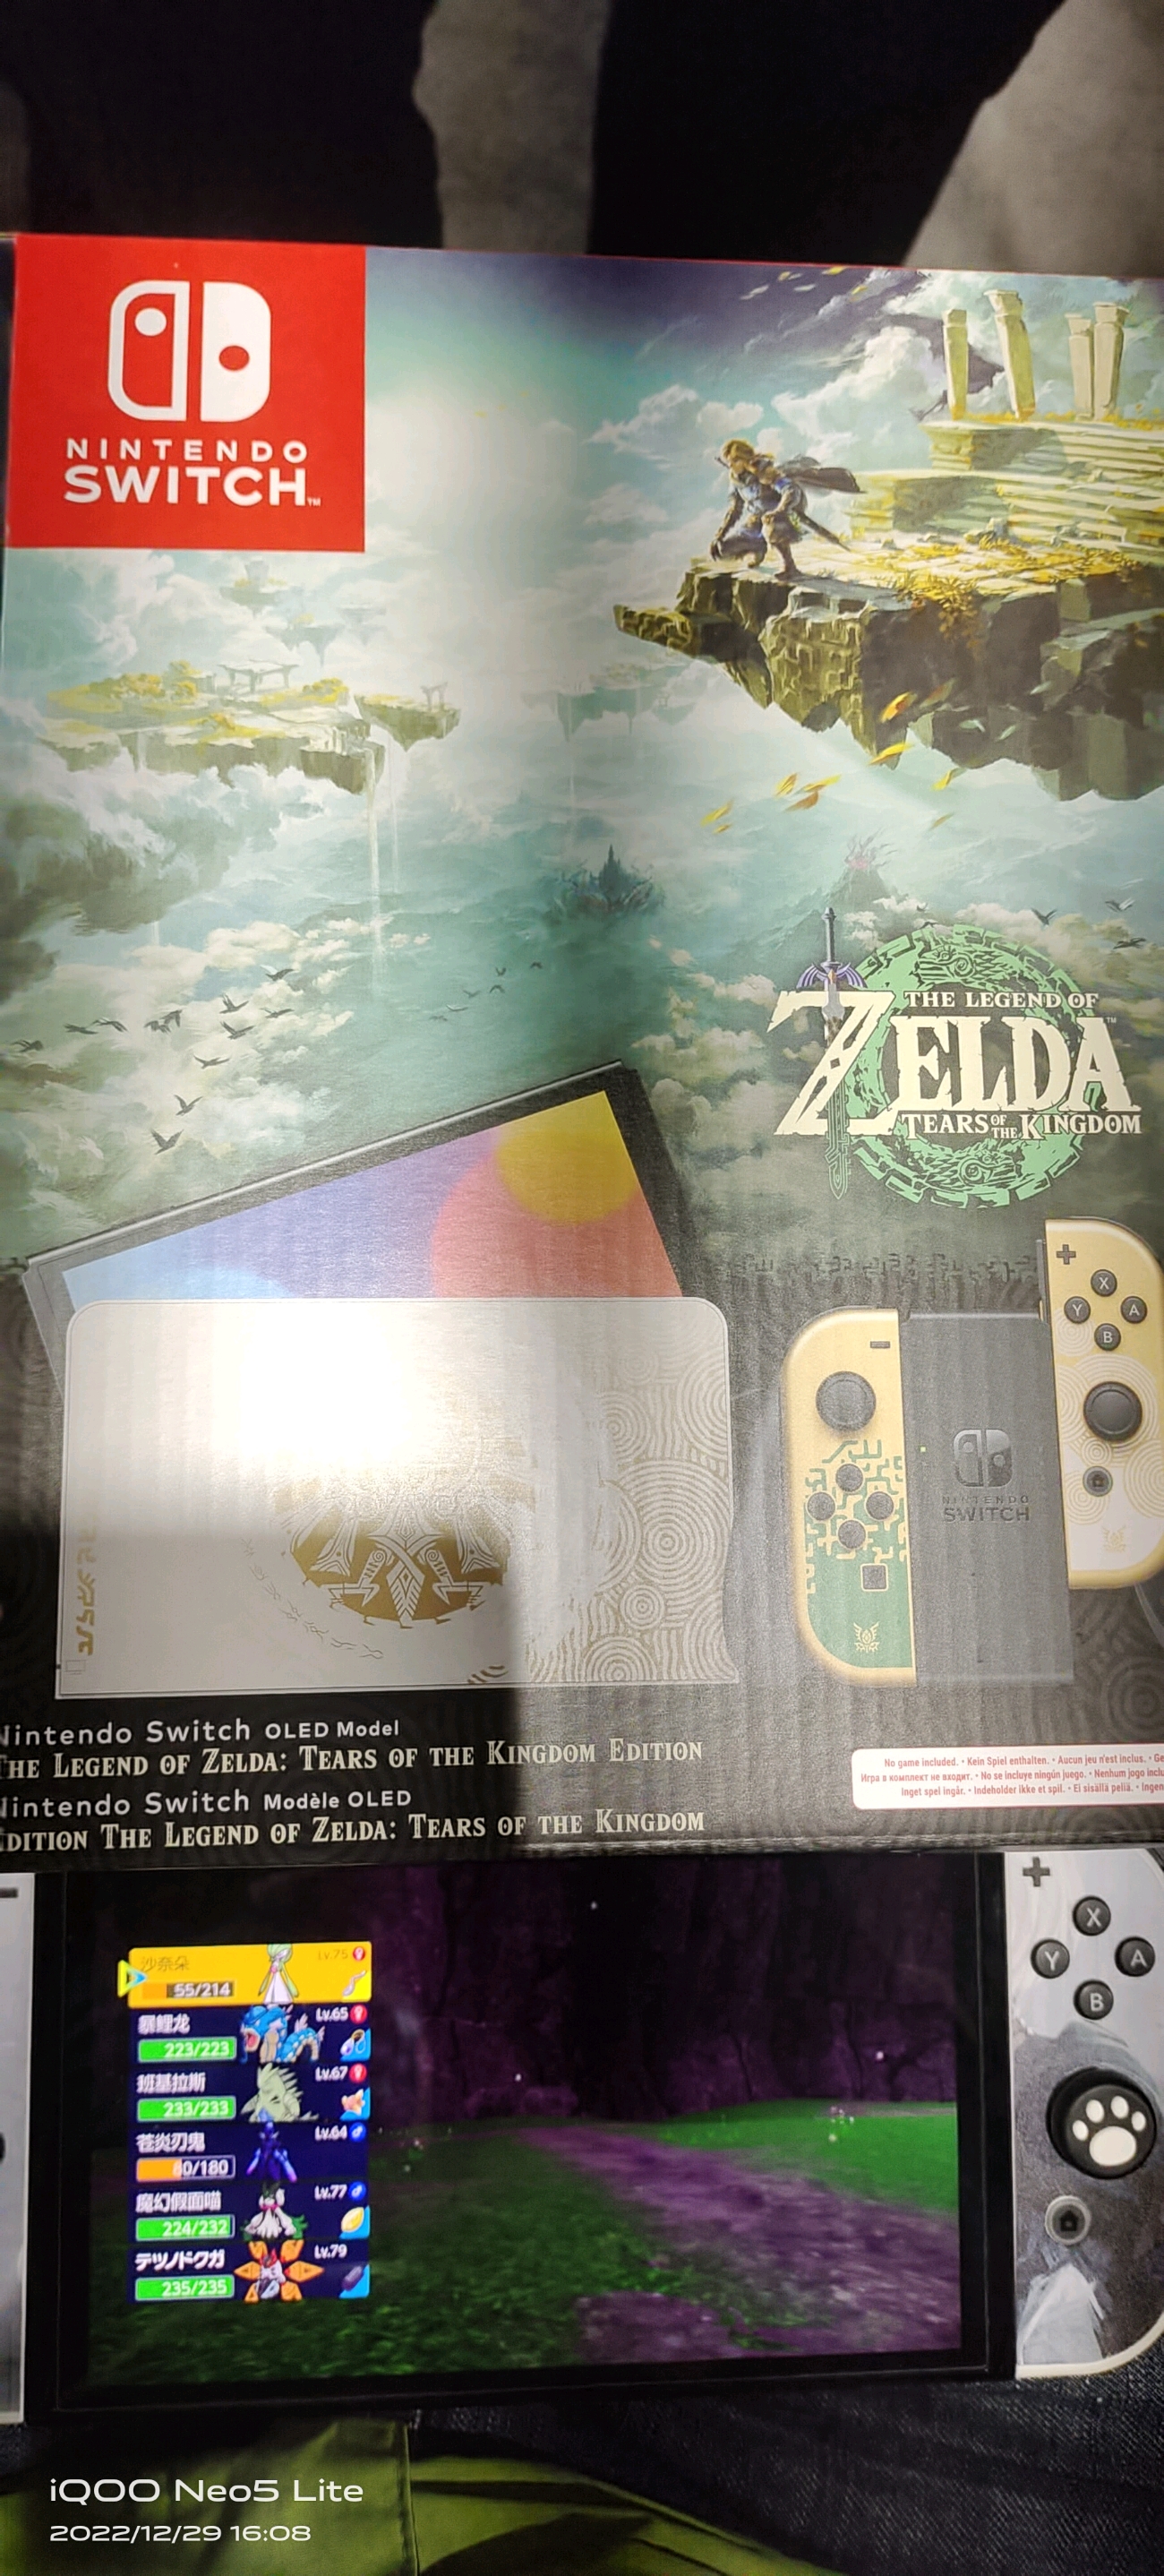 Console Nintendo Switch Oled - The Legend of Zelda: Tears of the Kingdom  Edition